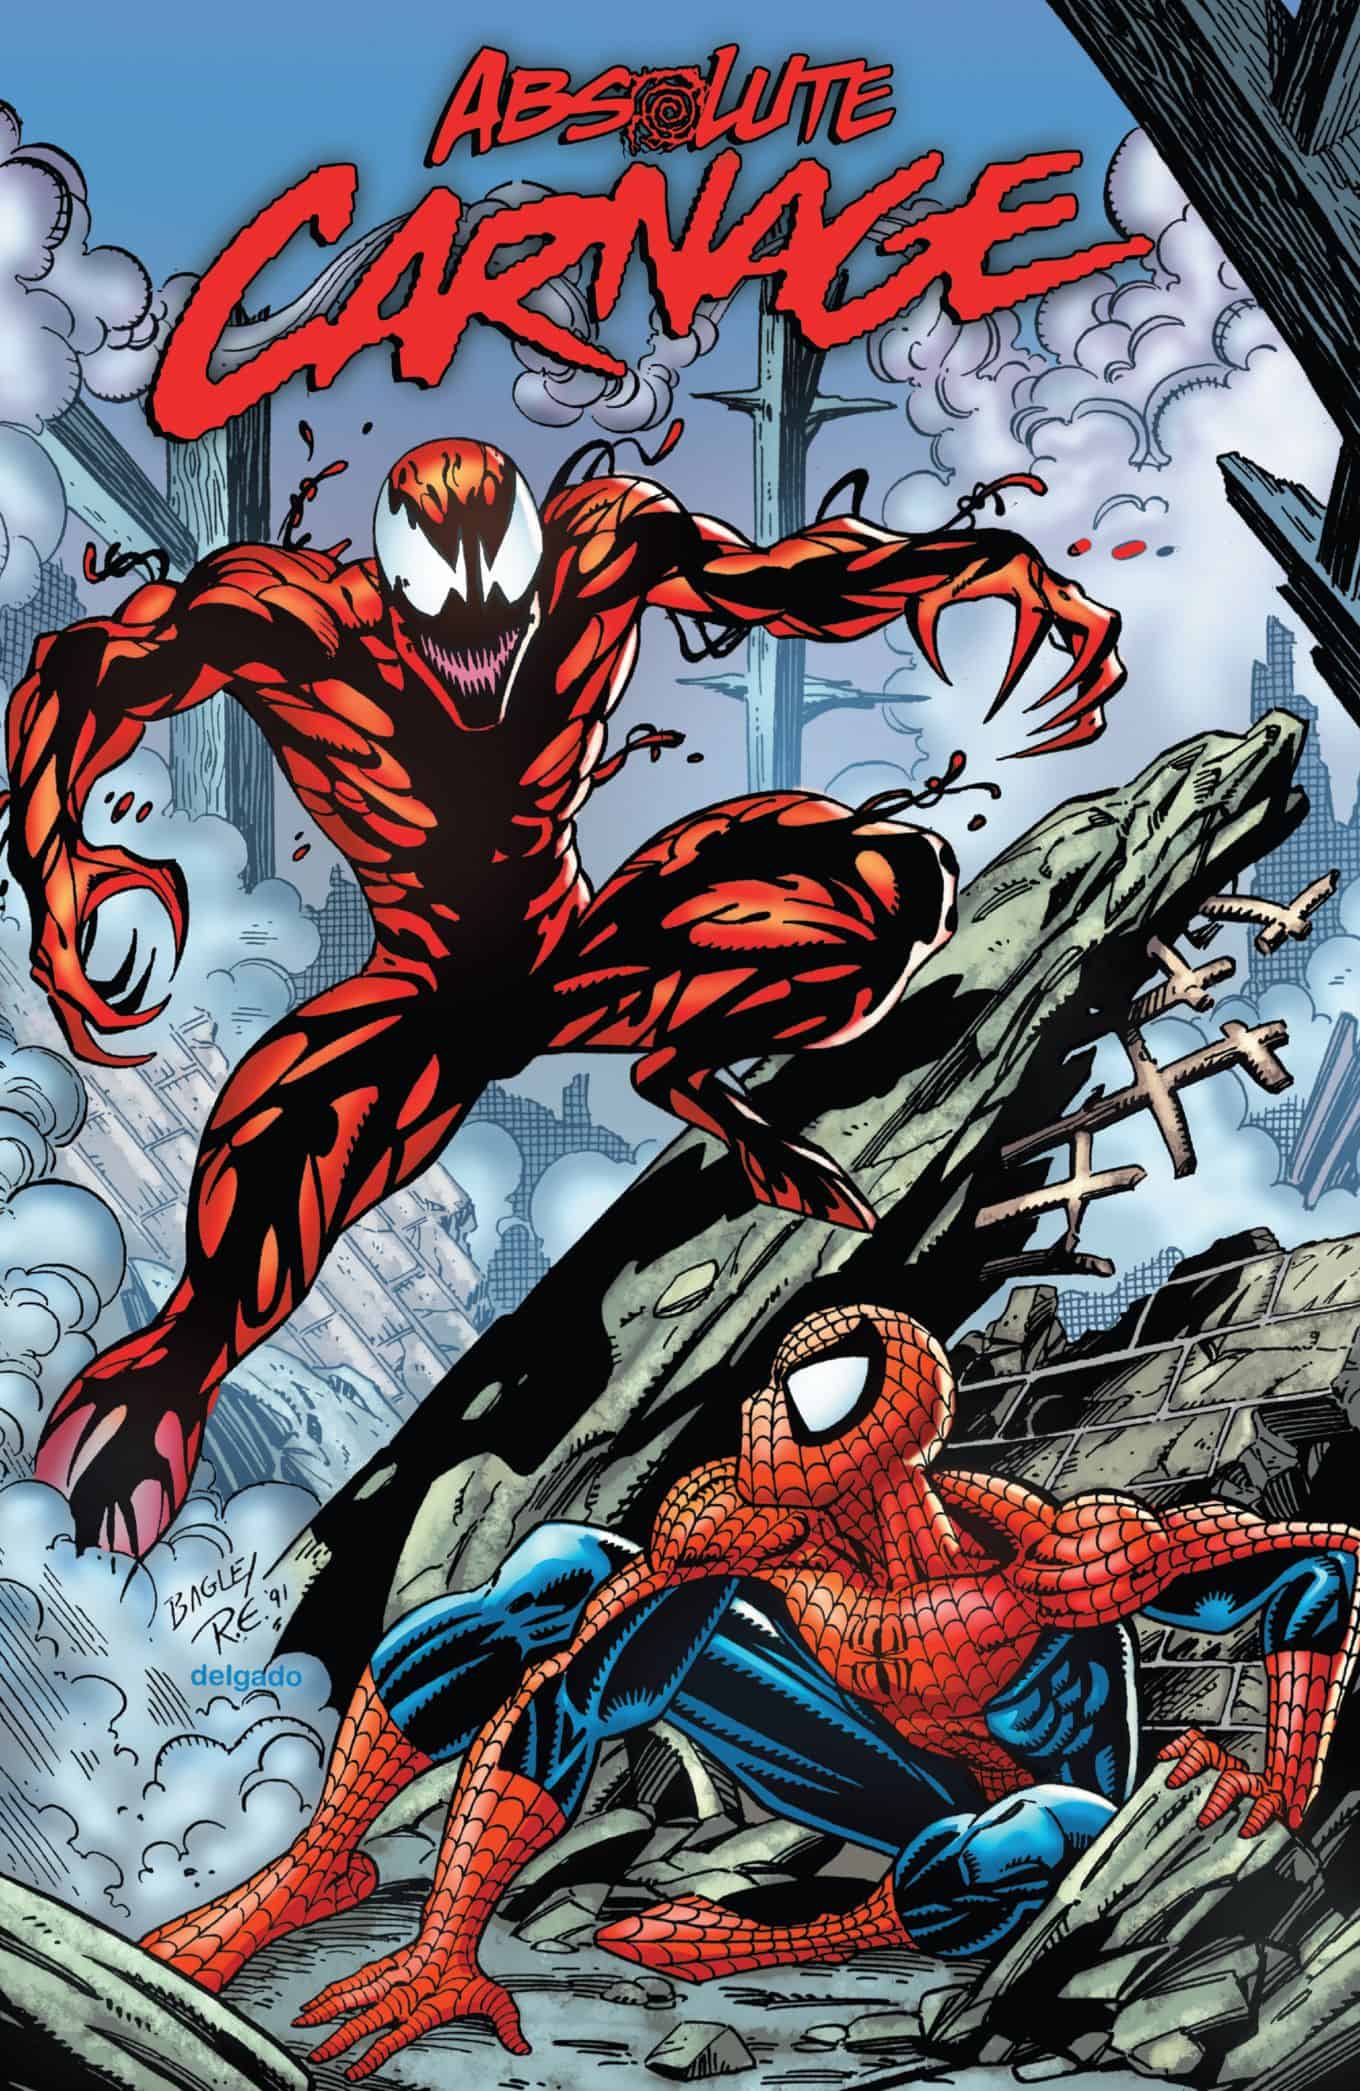 Marvel Comics Universe & Absolute Carnage Director’s Cut 1 Spoilers